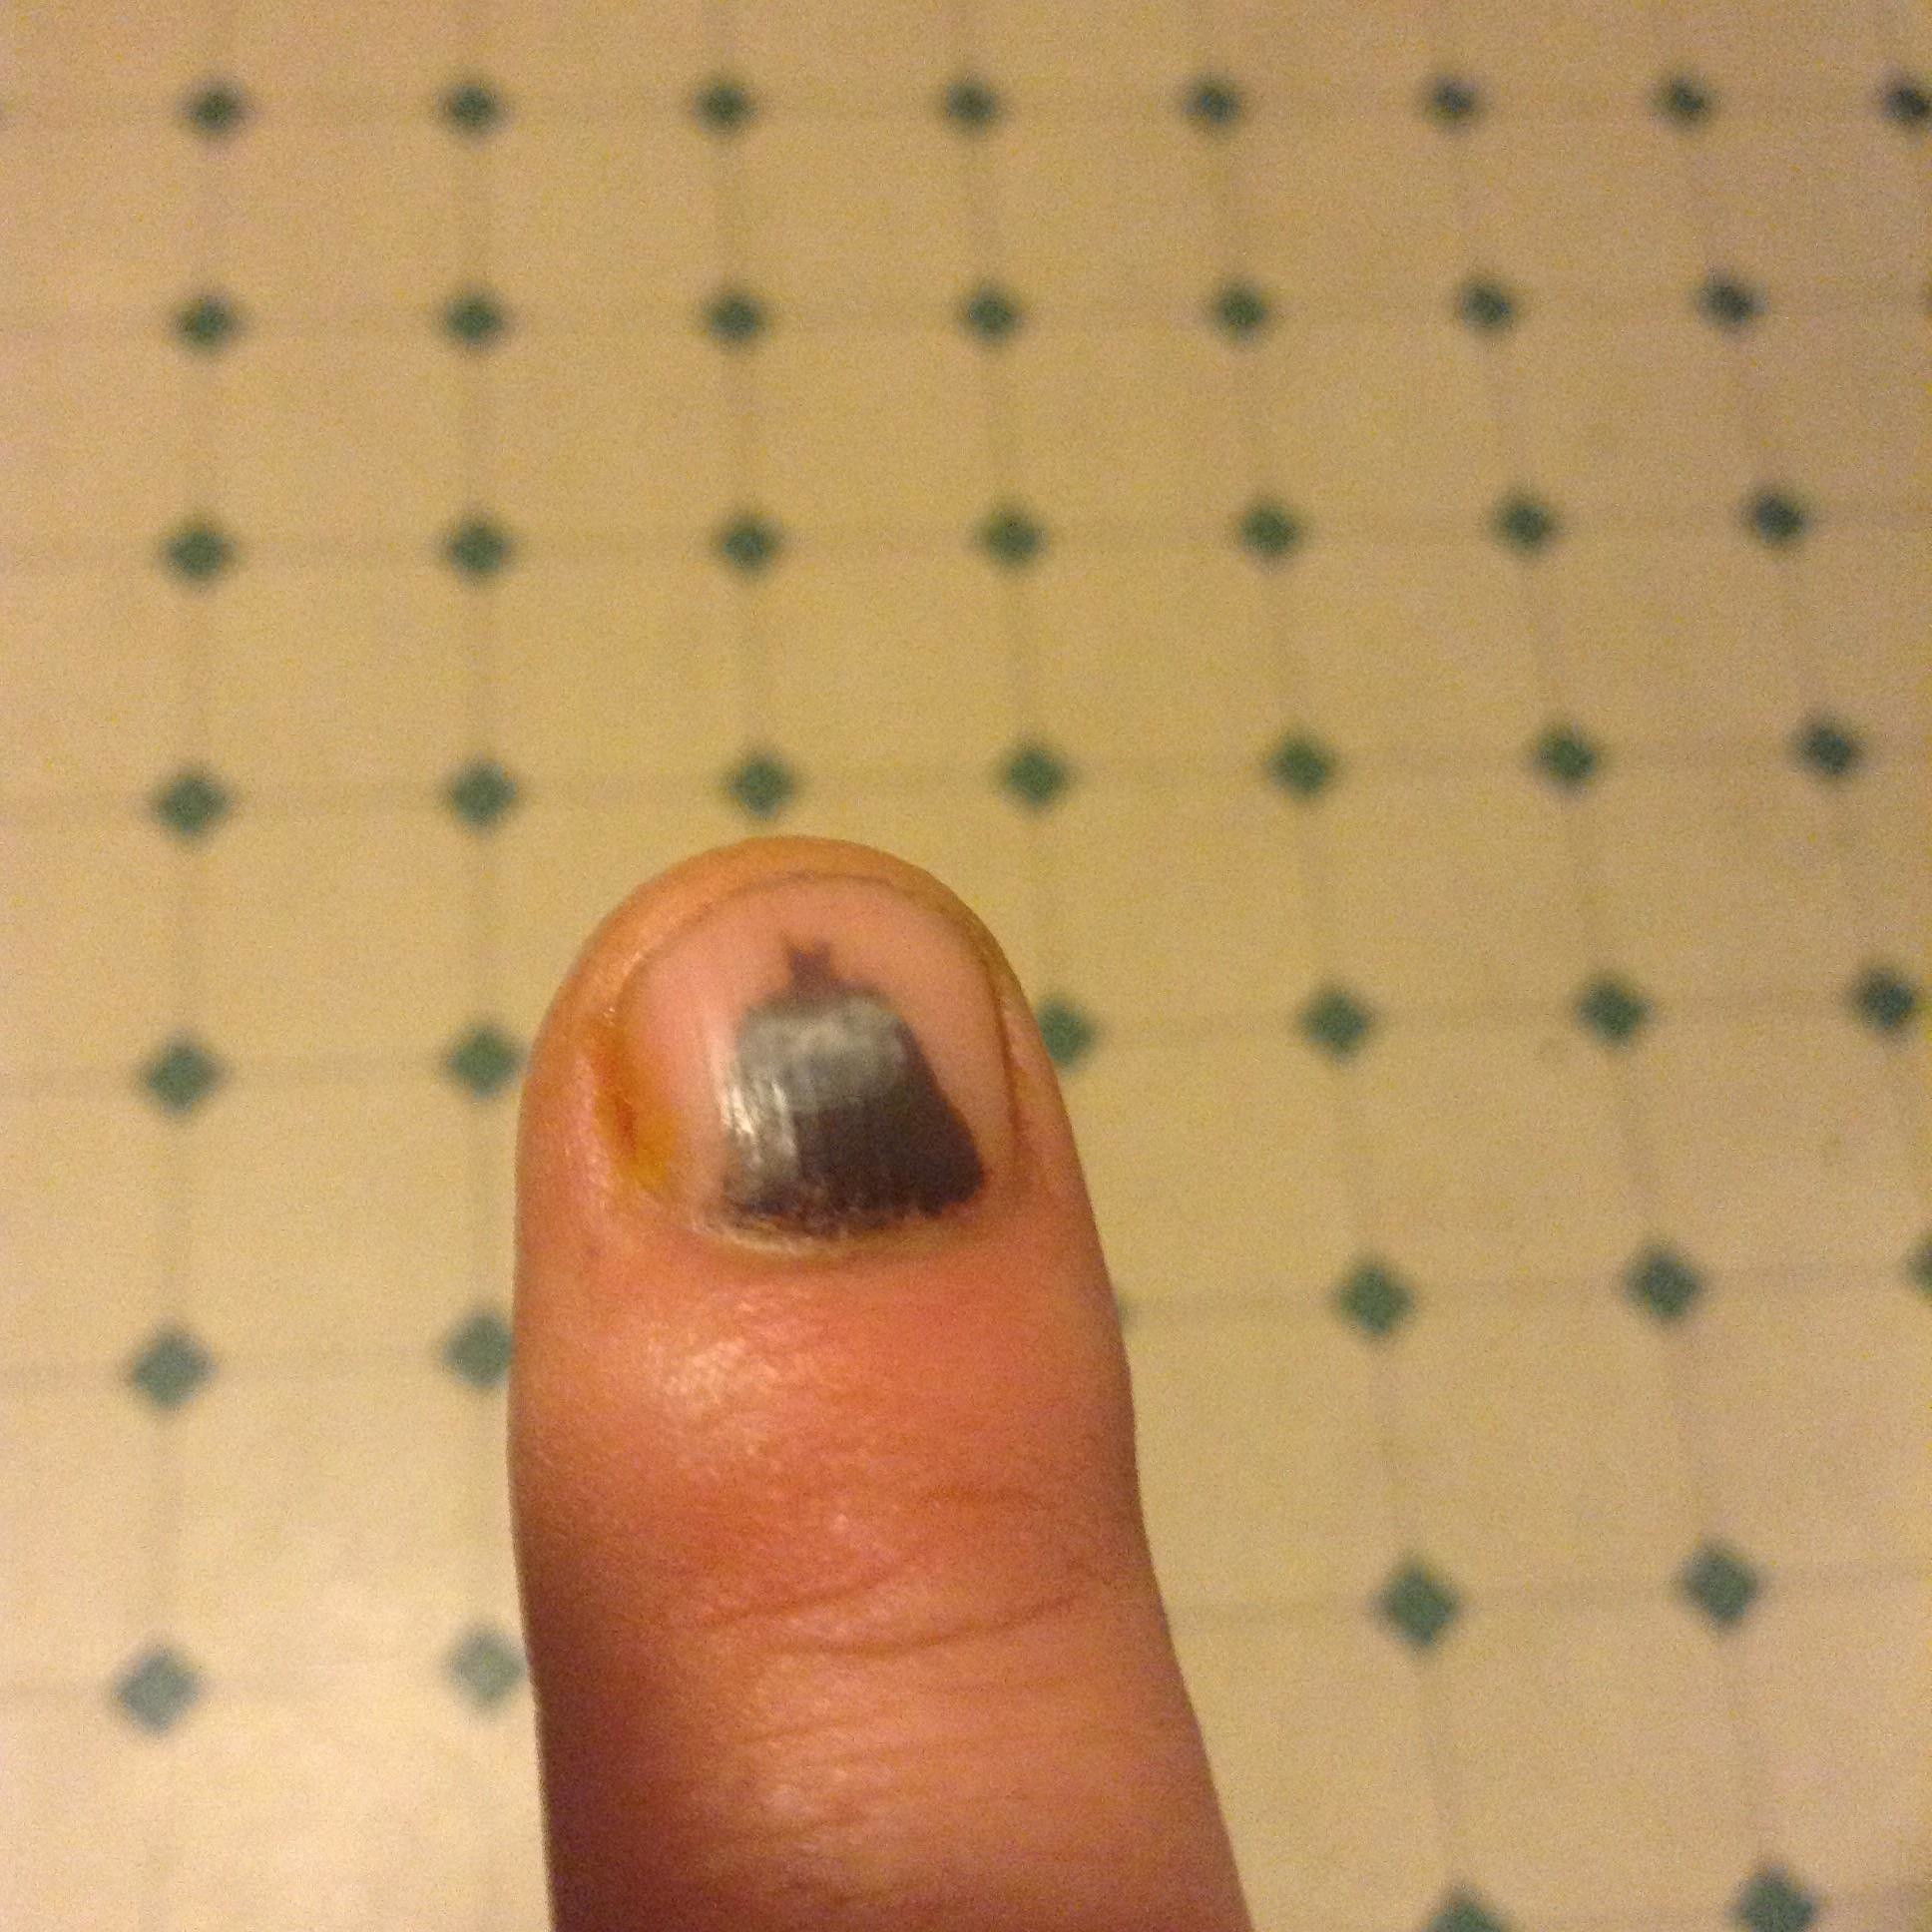 When Batman shows up on your smashed fingernail.